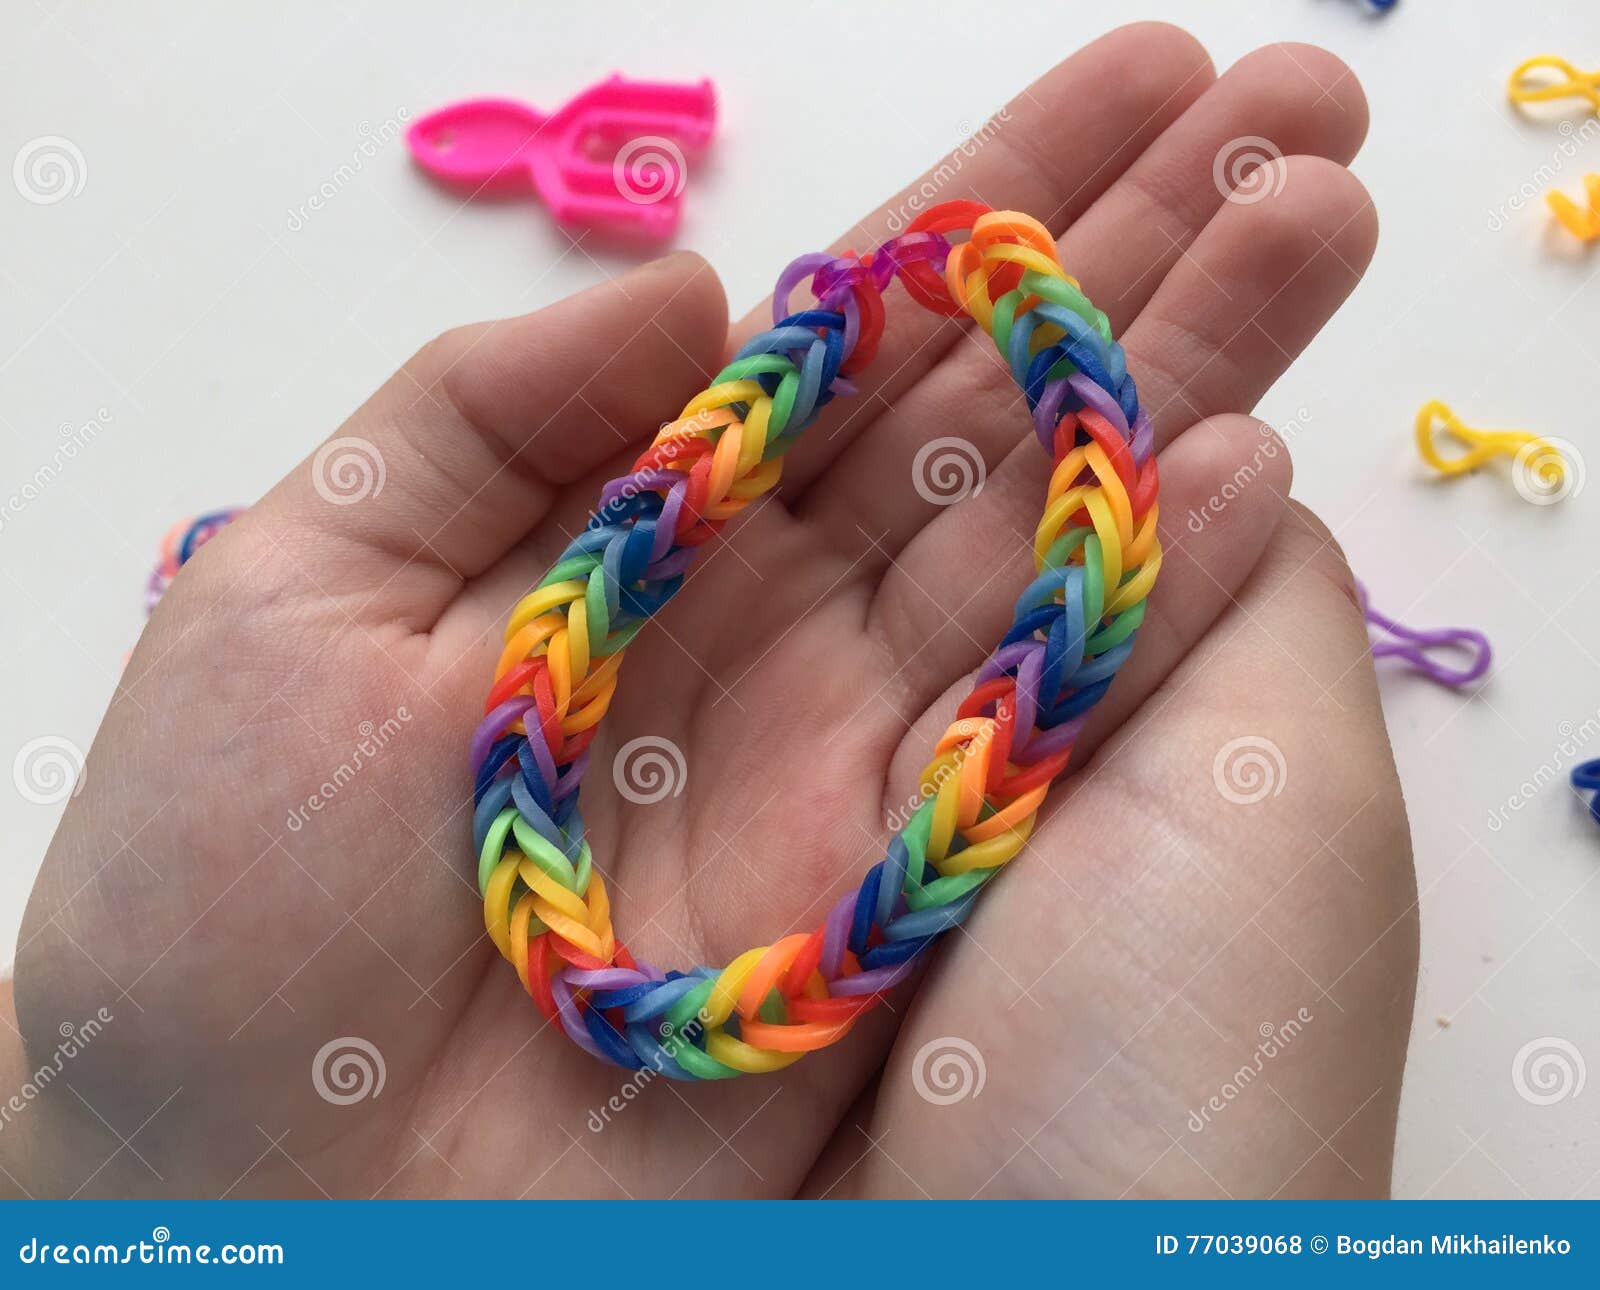 The Making Bracelets from Rubber Bands Stock Photo - Image of visible,  craft: 77039068